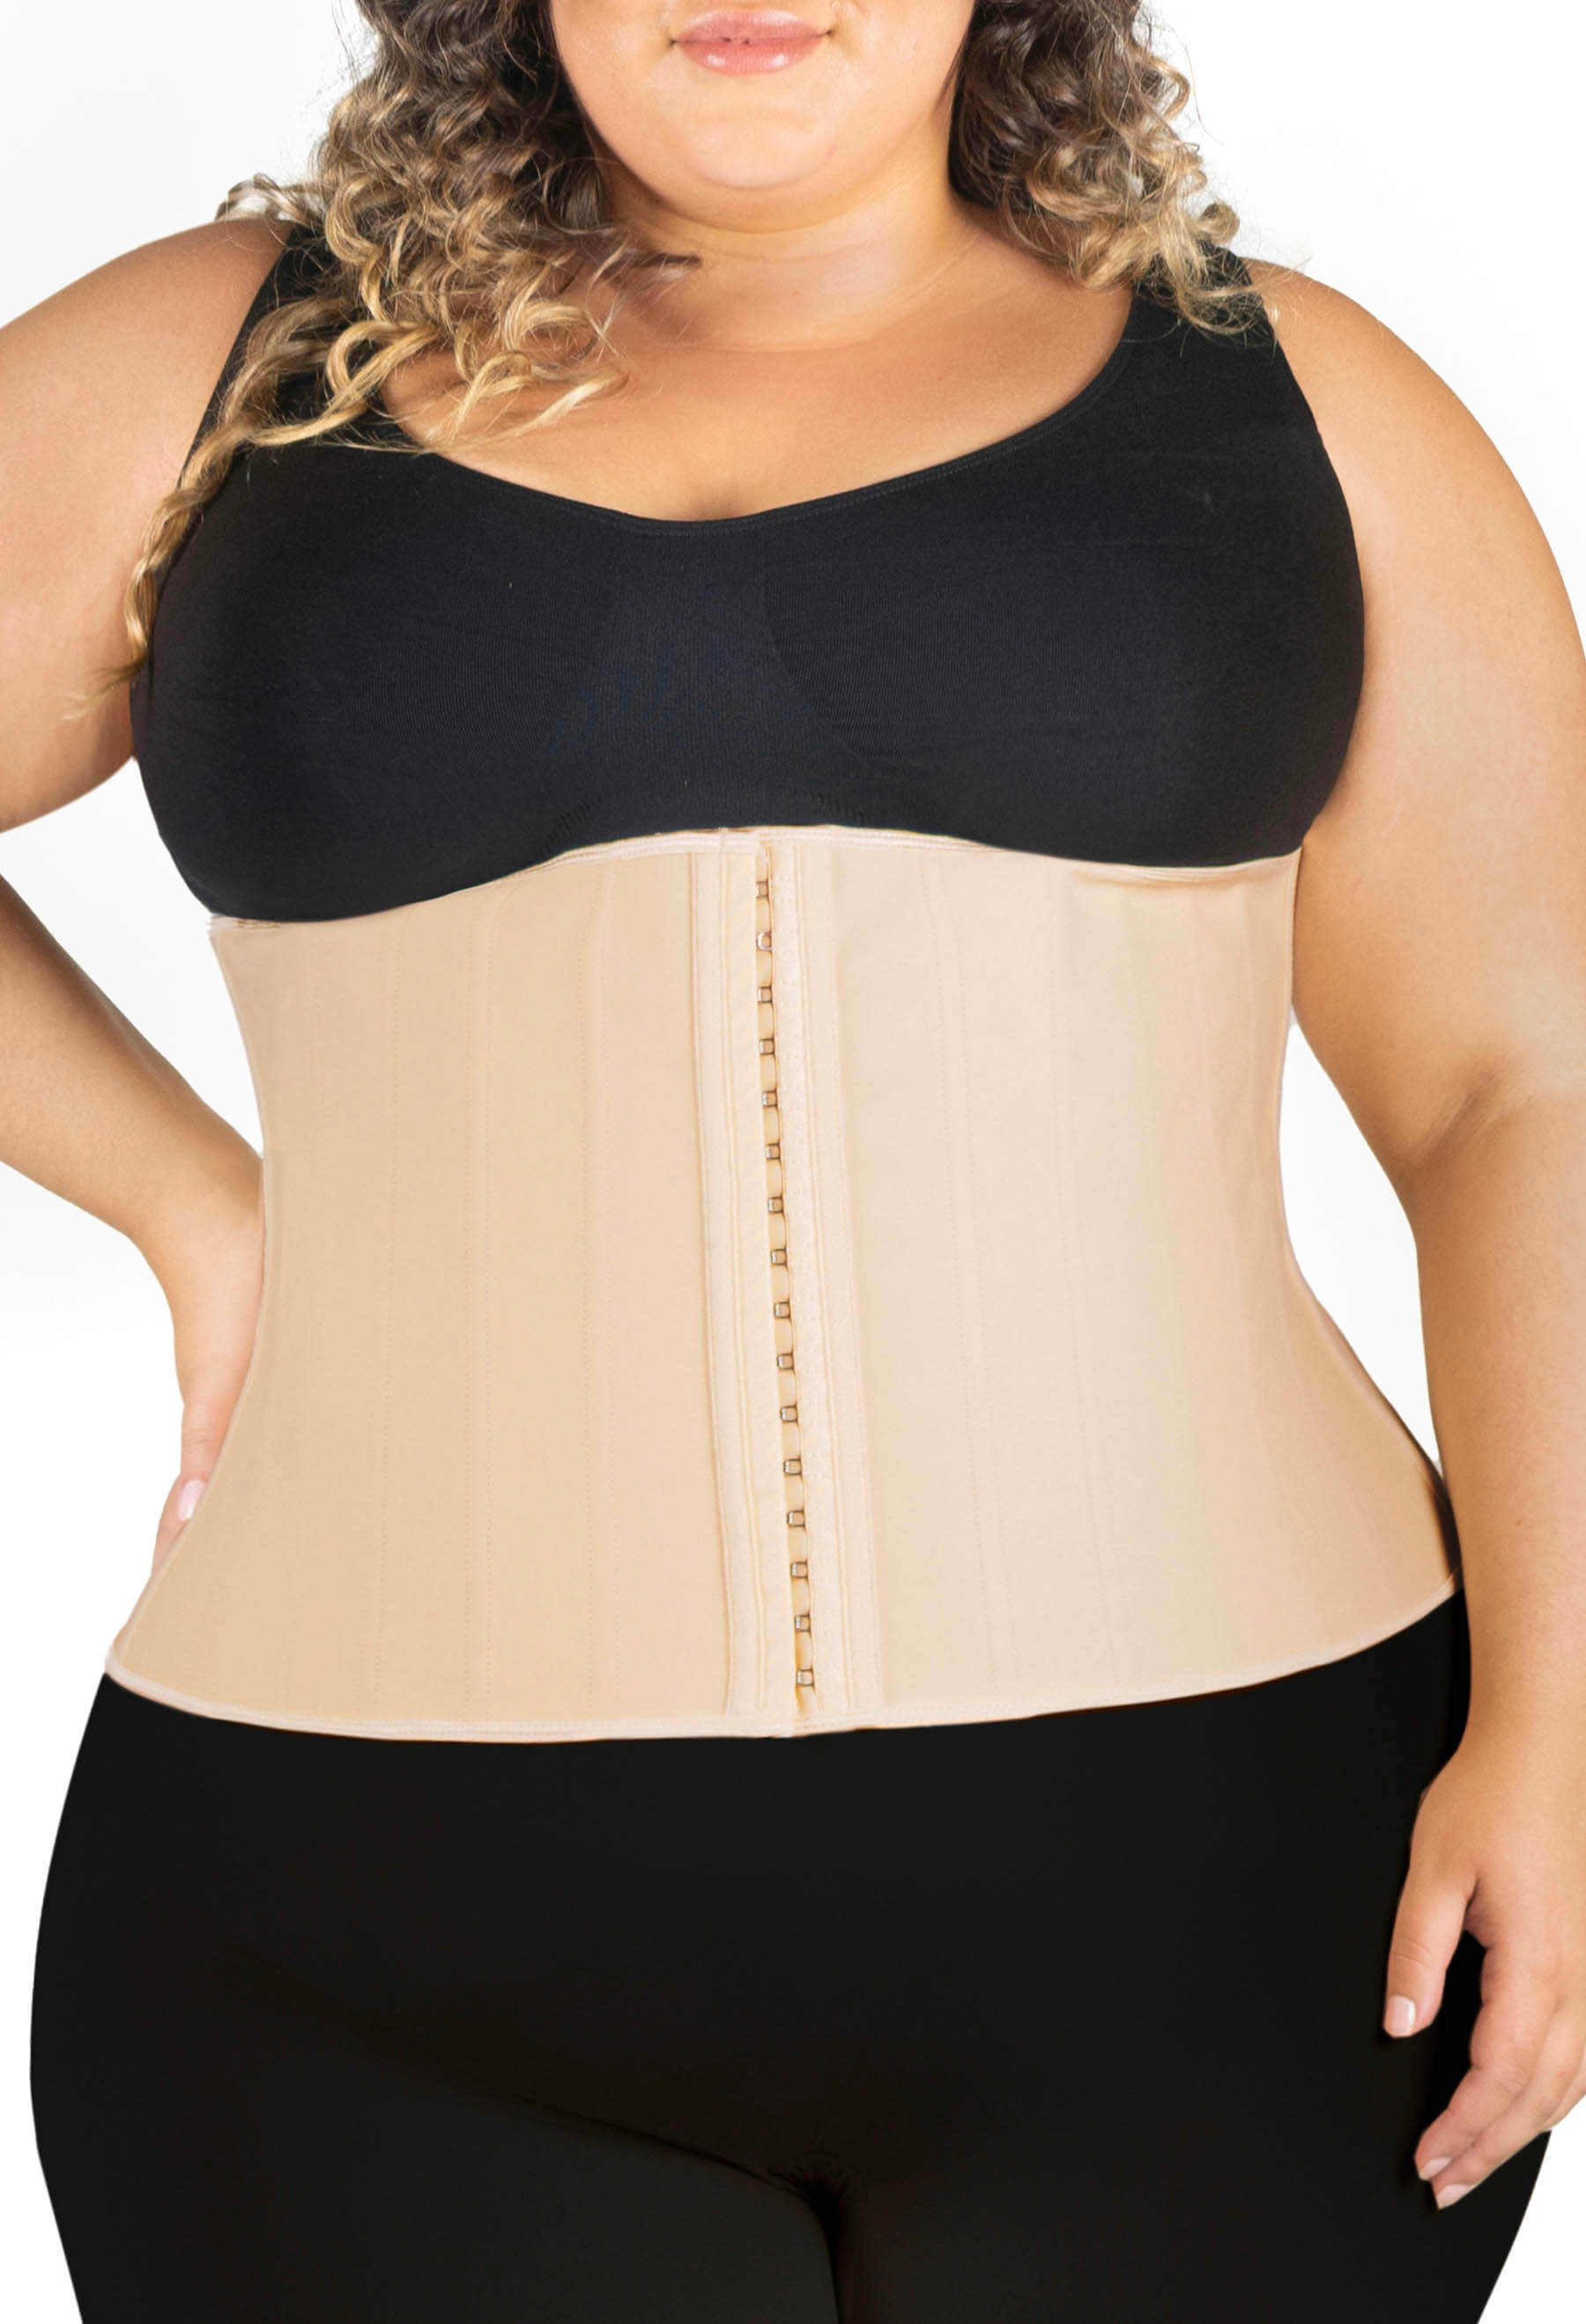 Underbust Extra Firm High Compression Bustier – Wear This Love